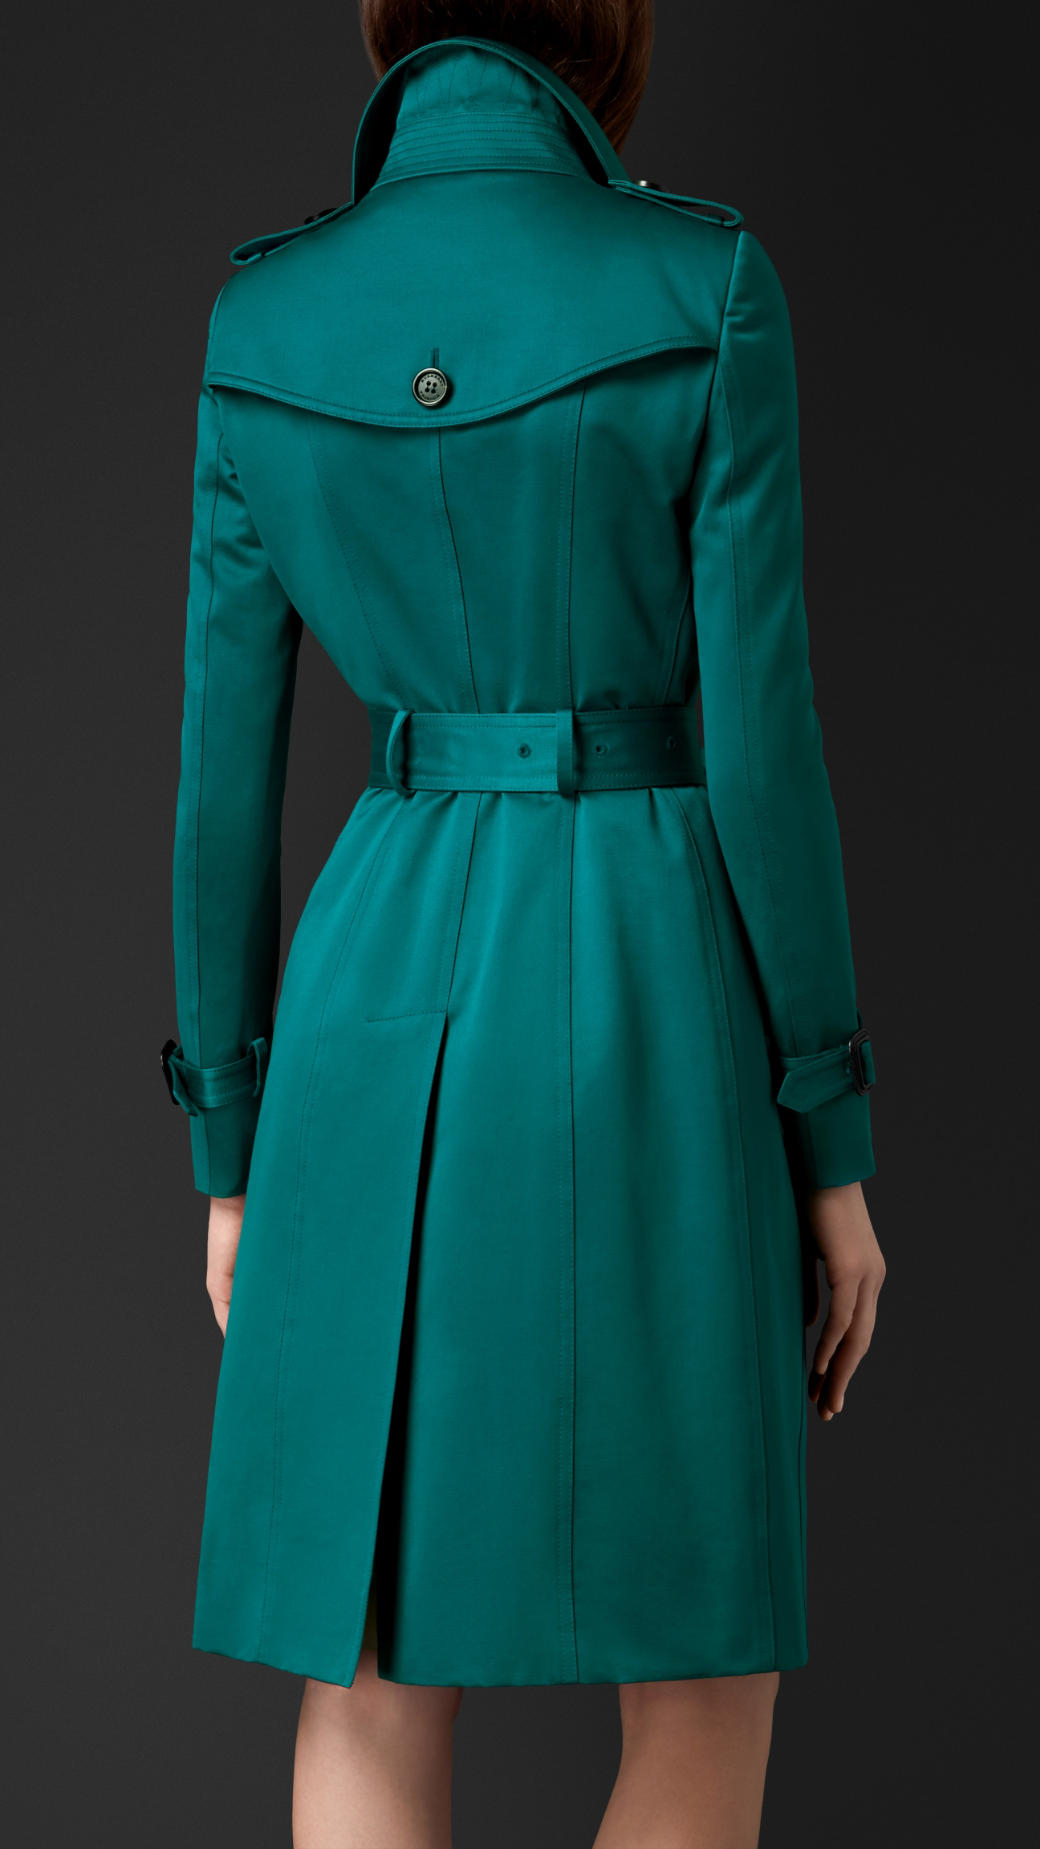 Burberry Cotton Sateen Trench Coat in Teal (bright teal) | Lyst